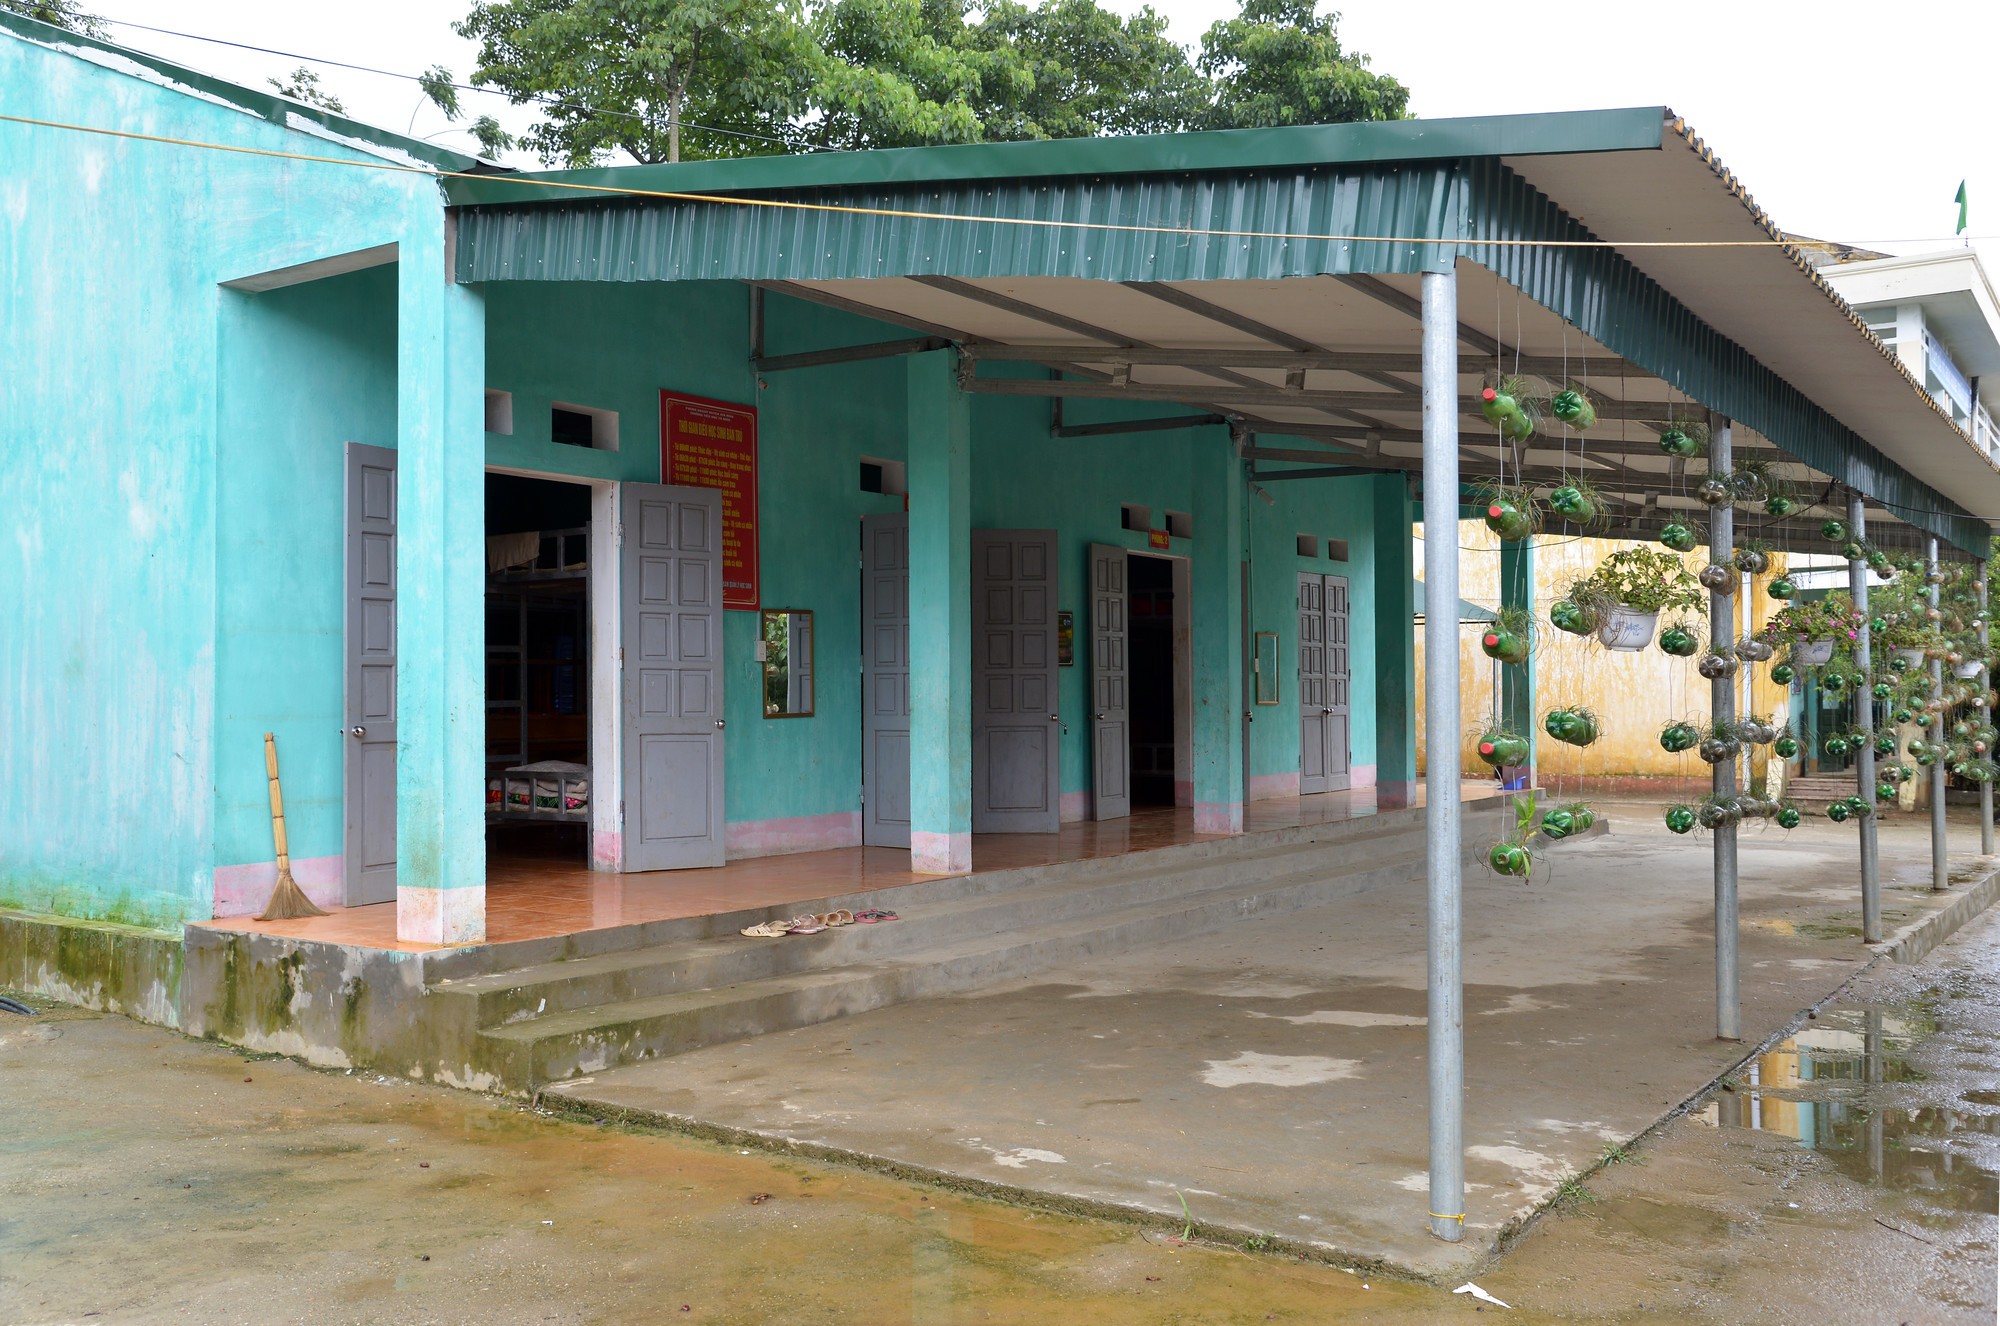 A school that Plan International has helped to build dormitories at